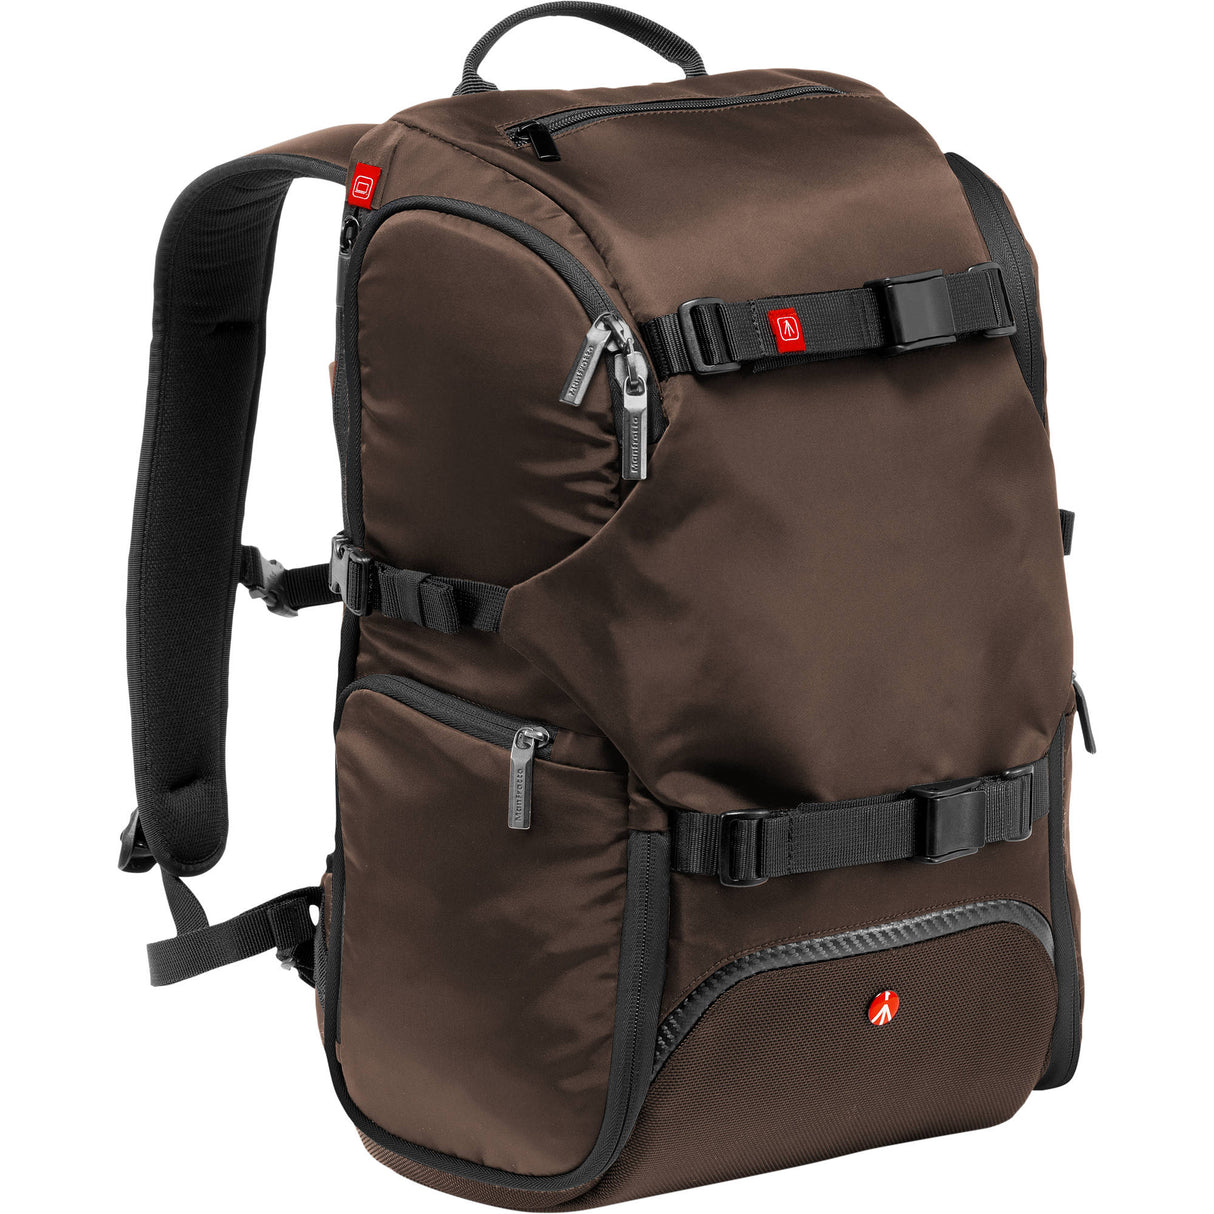 Manfrotto Advanced Travel Backpack (Brown)